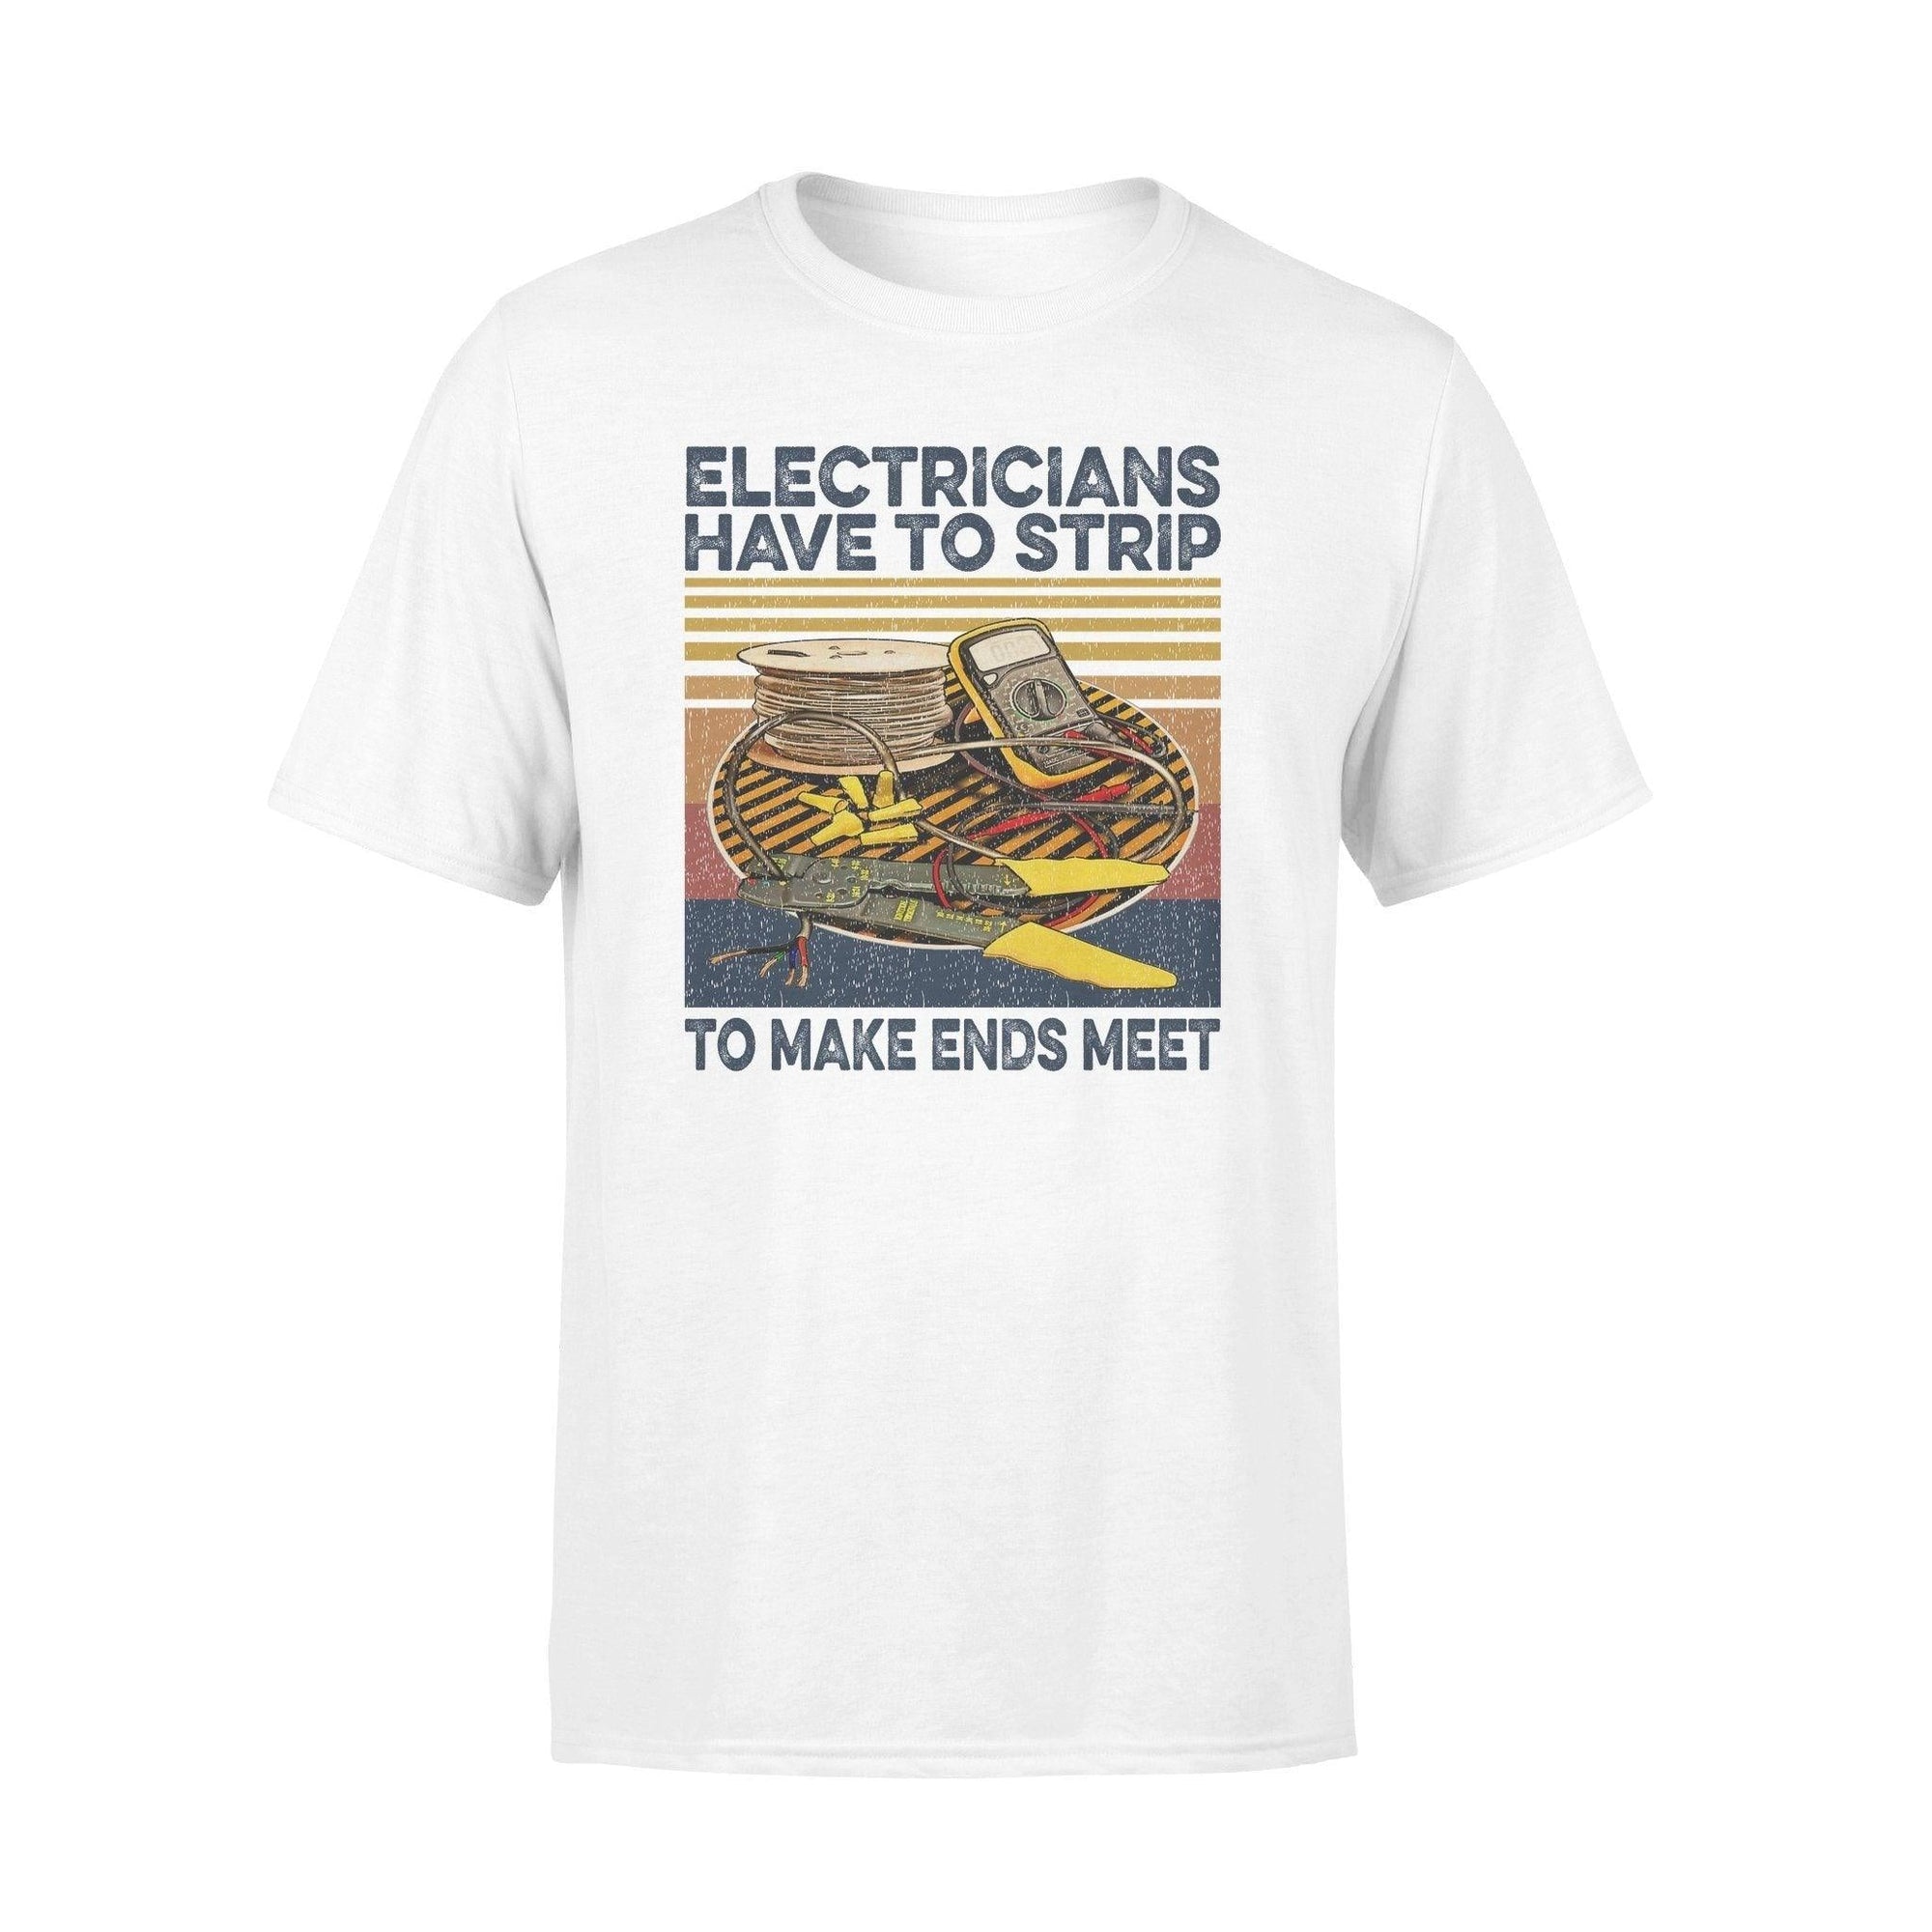 Electricians Electricians Must Strip- Standard T-shirt - PERSONAL84